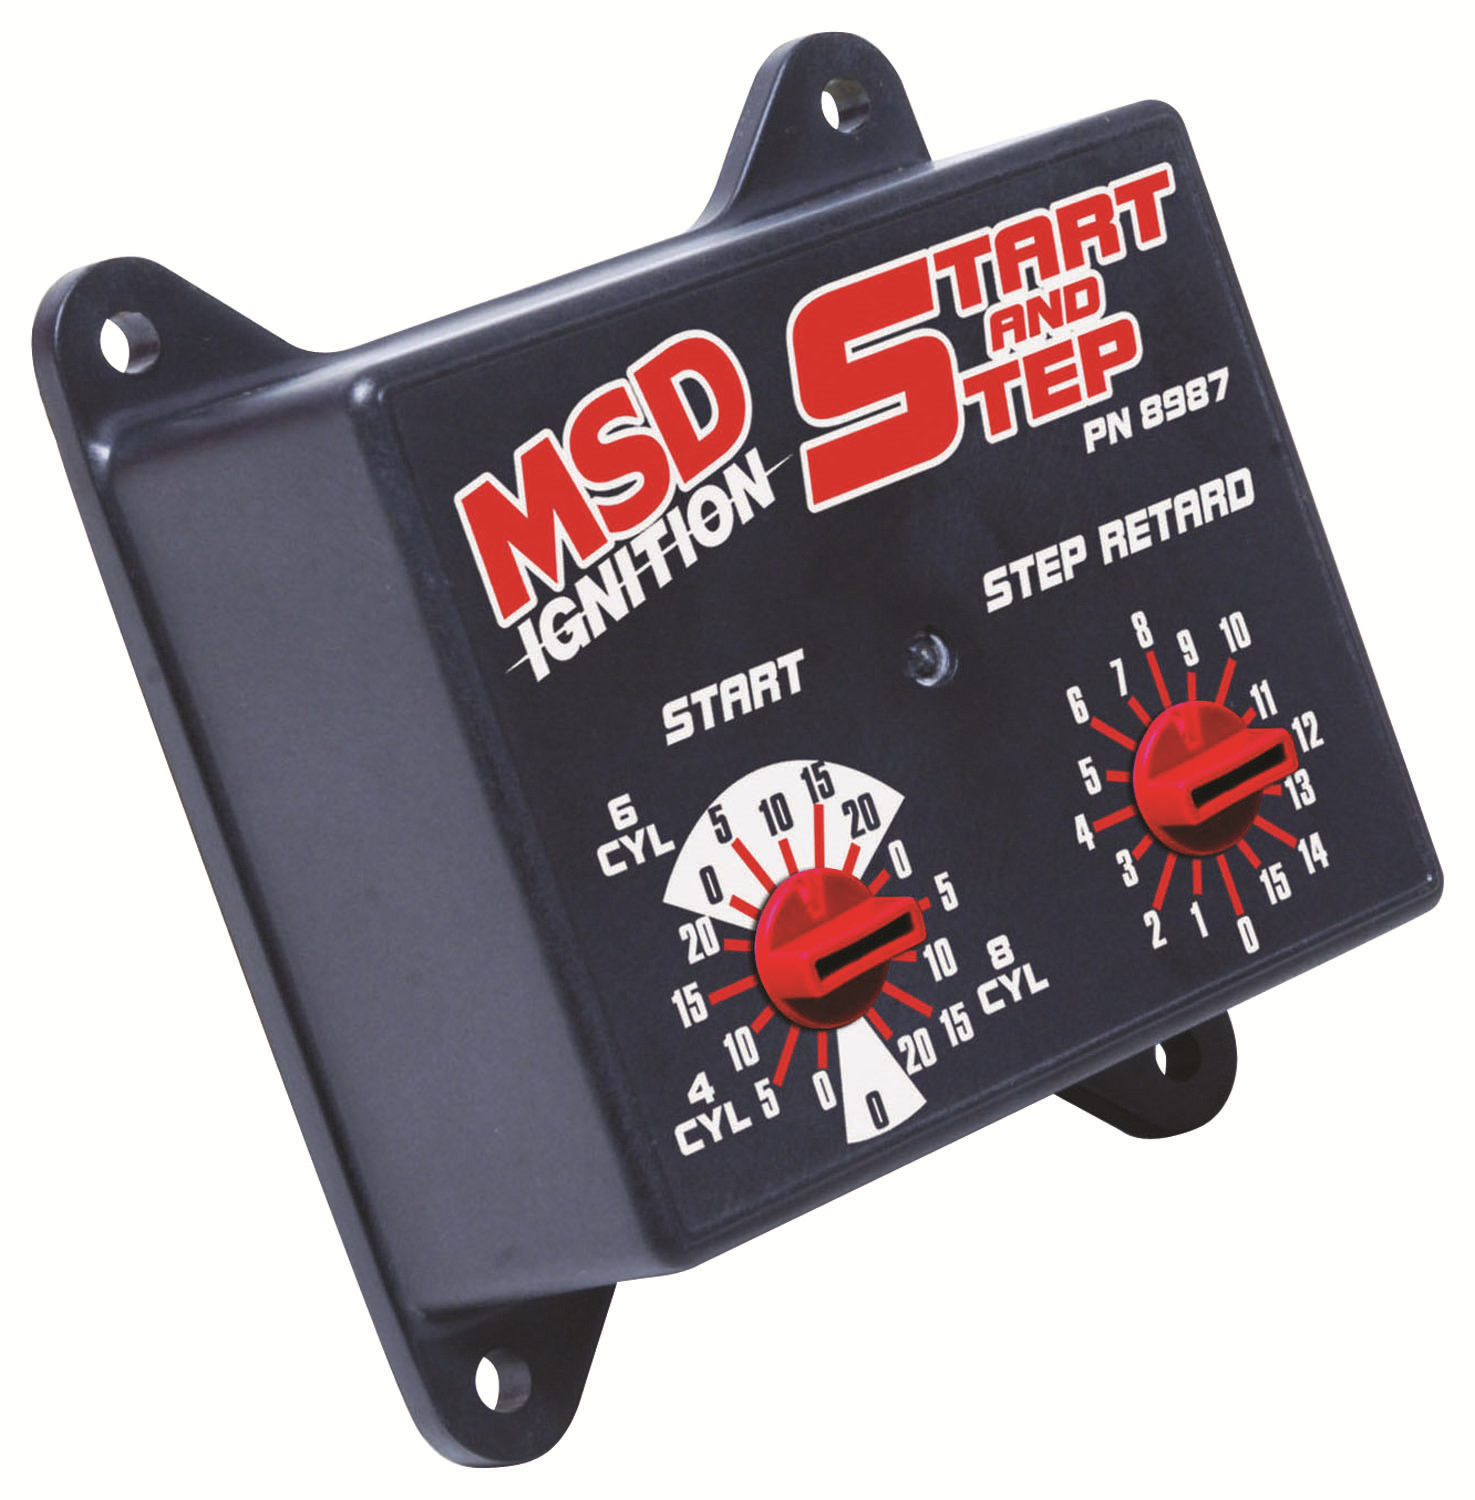 MSD Ignition MSD Ignition 8987 Start And Step Timing Retard Control